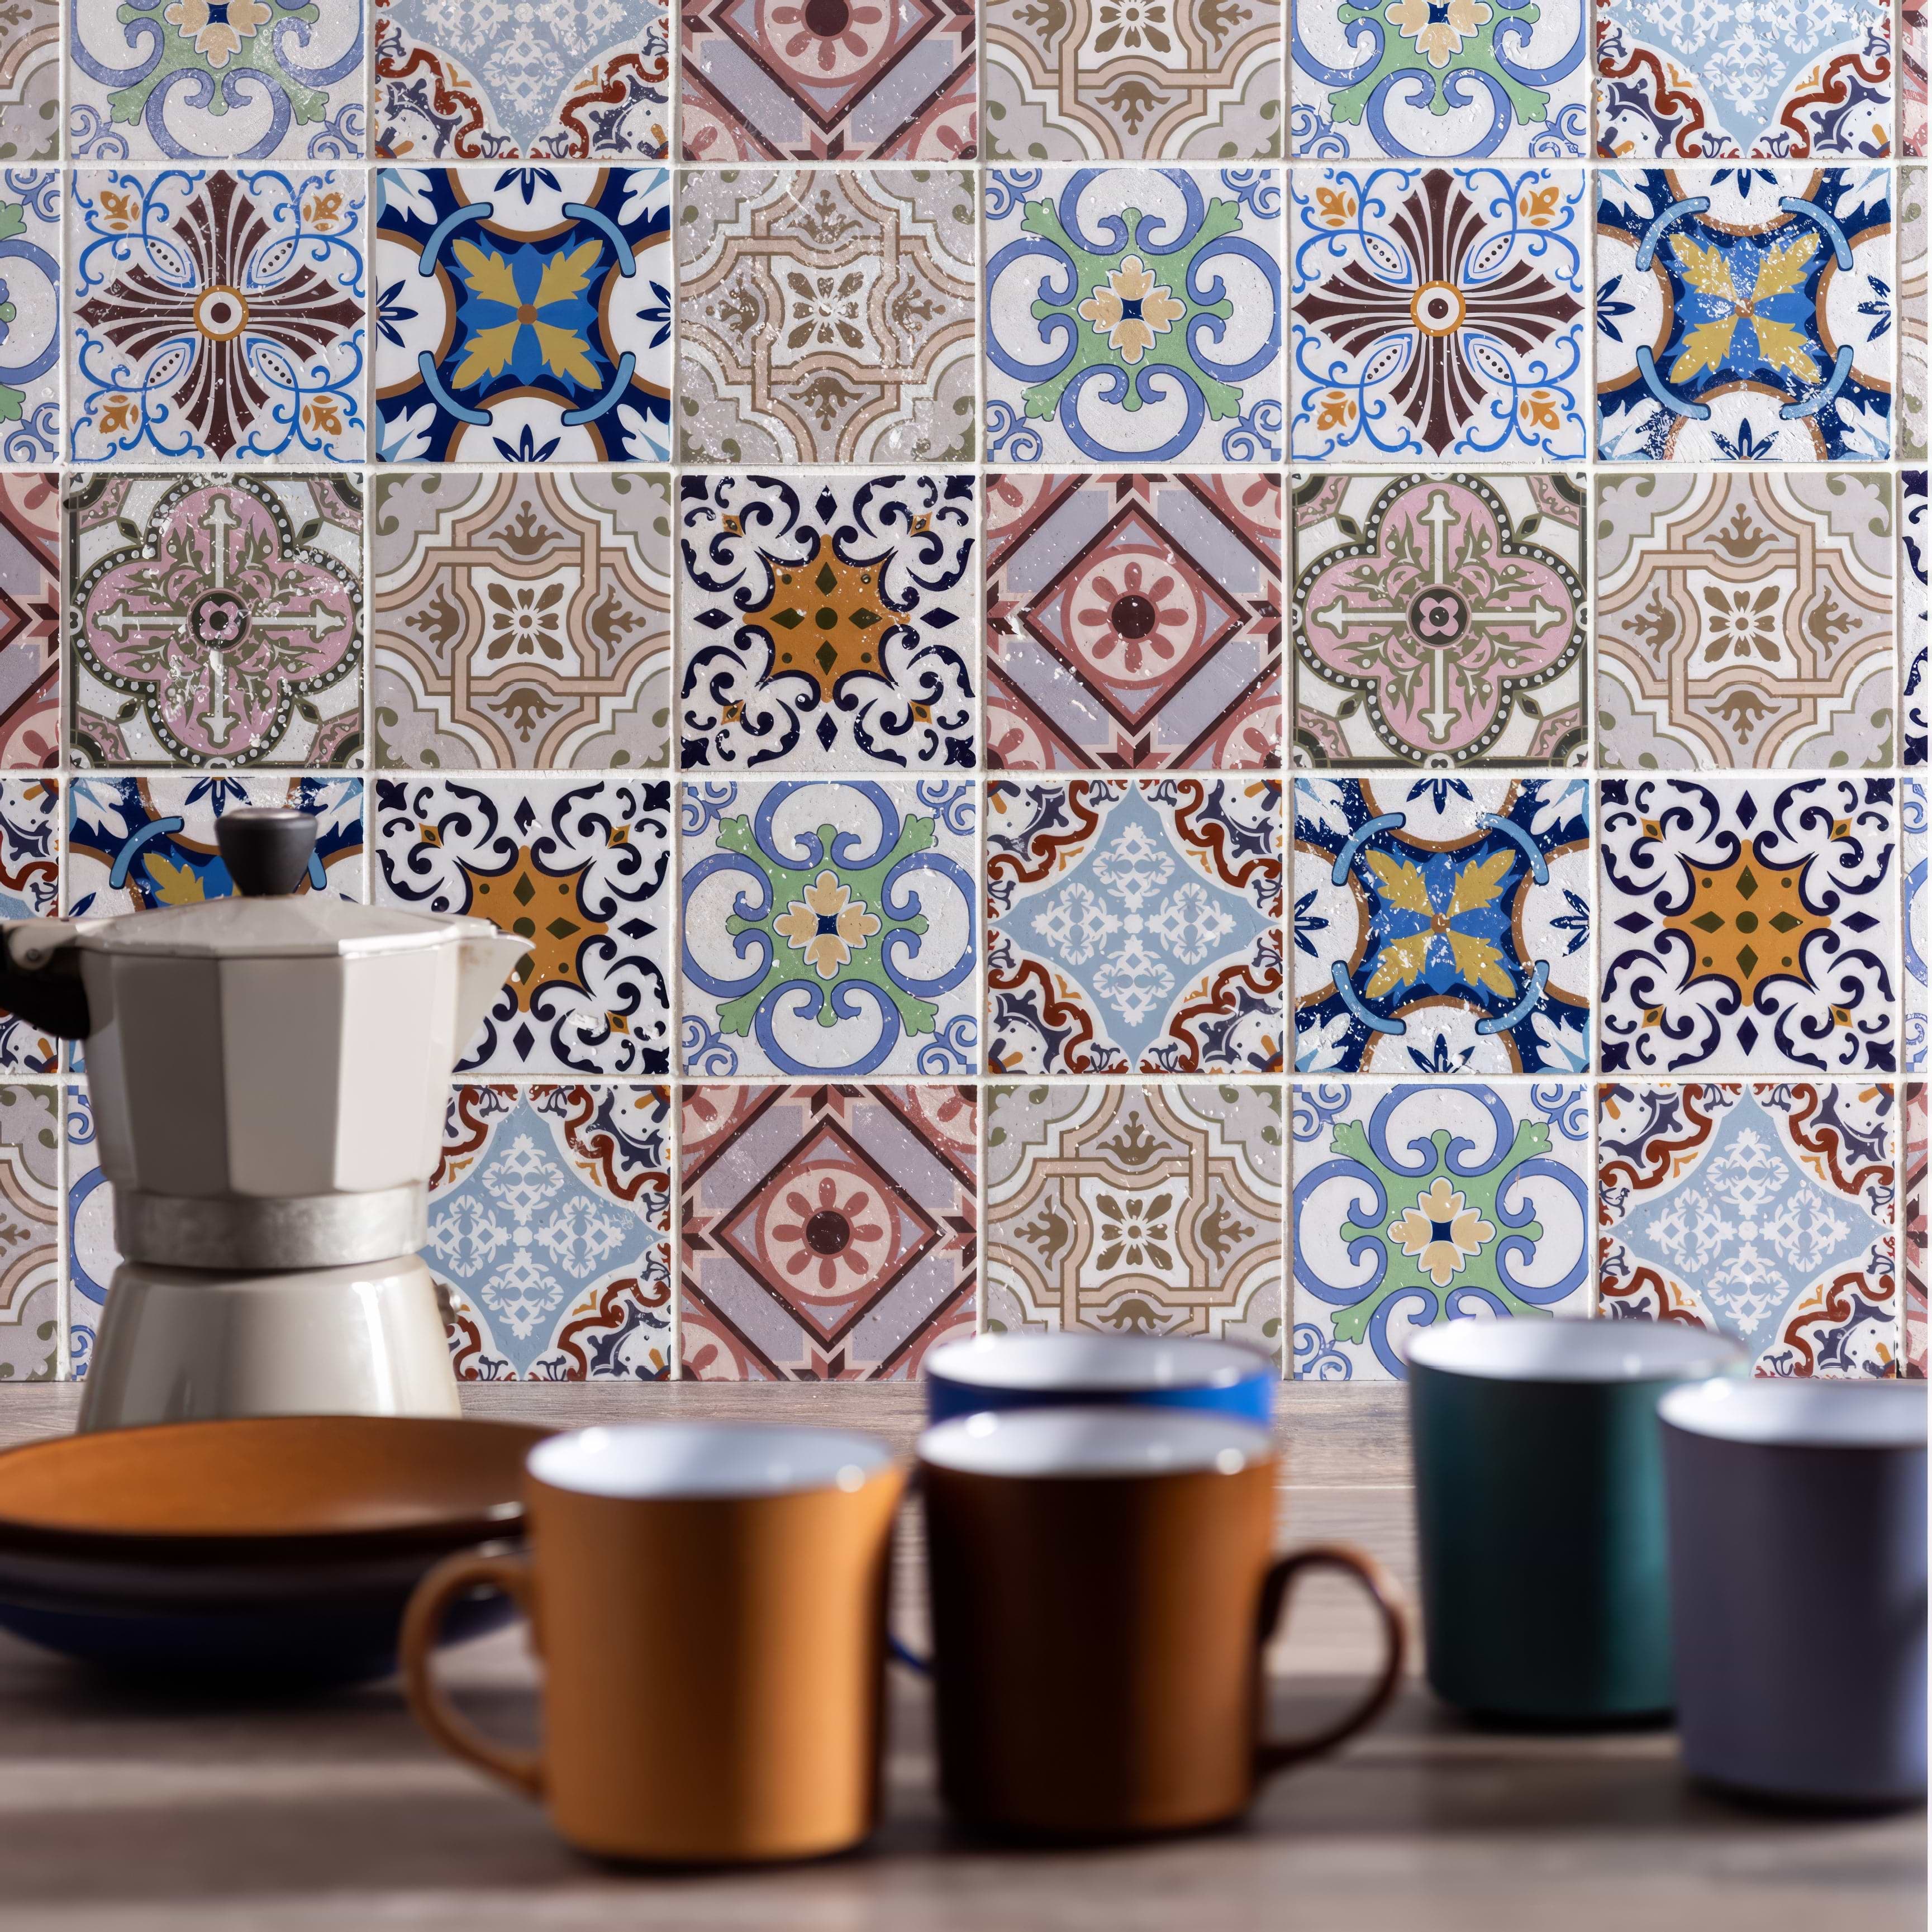 Fable Patterned Mosaic - Hyperion Tiles